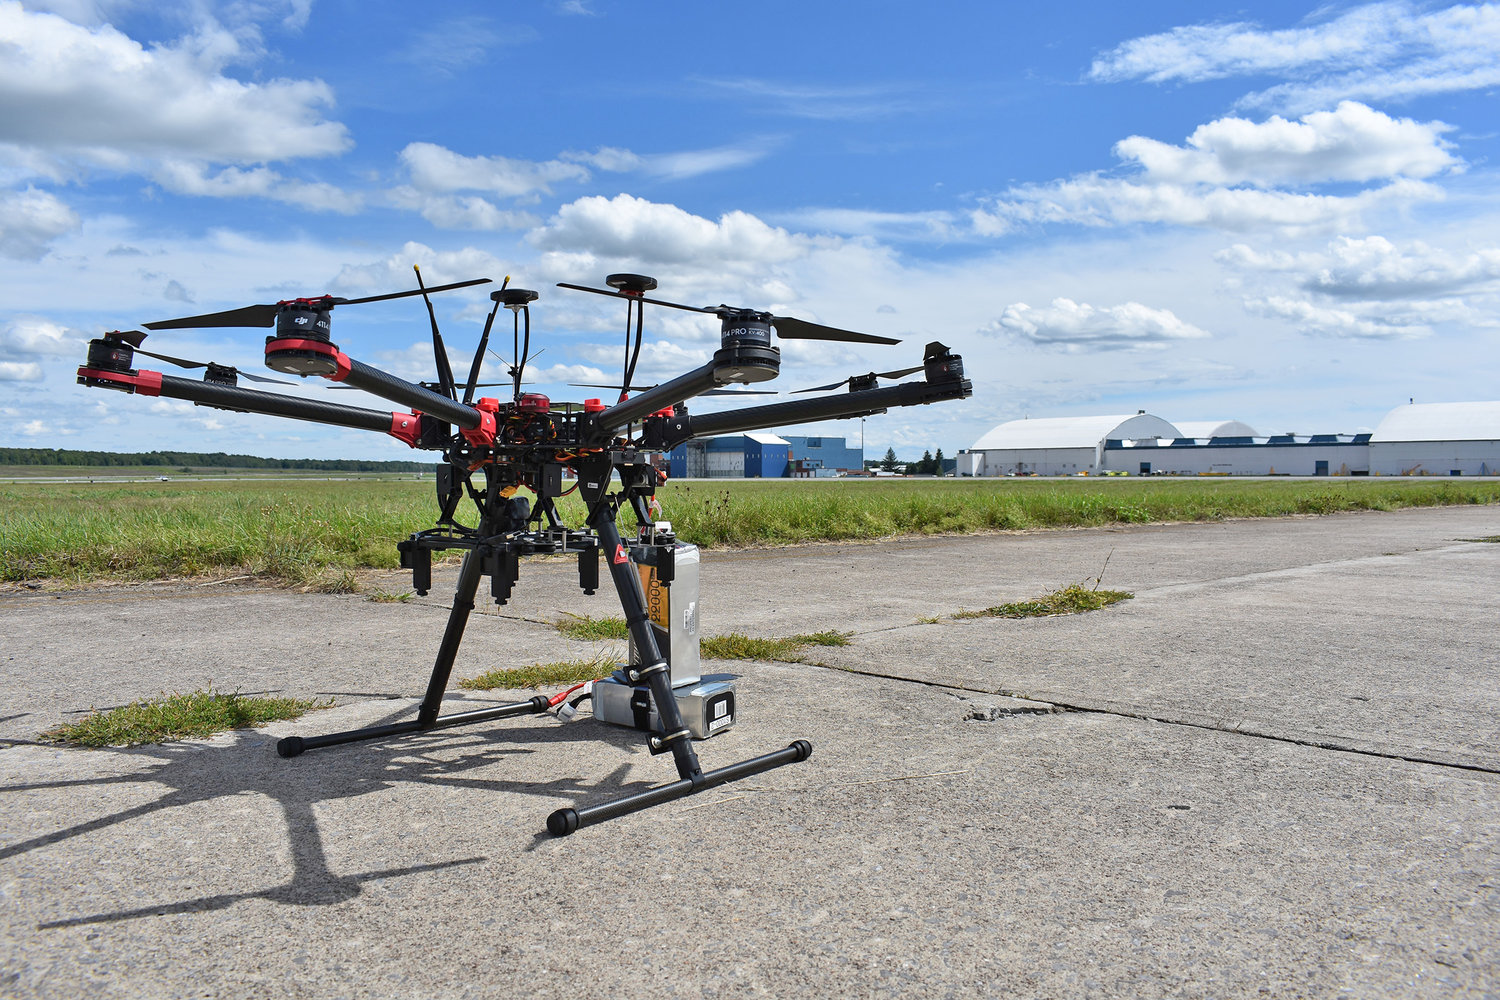 ON THE FOREFRONT — A drone sits on the runway at the Griffiss Business and Technology Park in this file photo. Live flights are set to begin this month at the Griffiss test site, one of two sites selected nationally, in the second phase of a federal program to develop a high-density air traffic control system for drones.